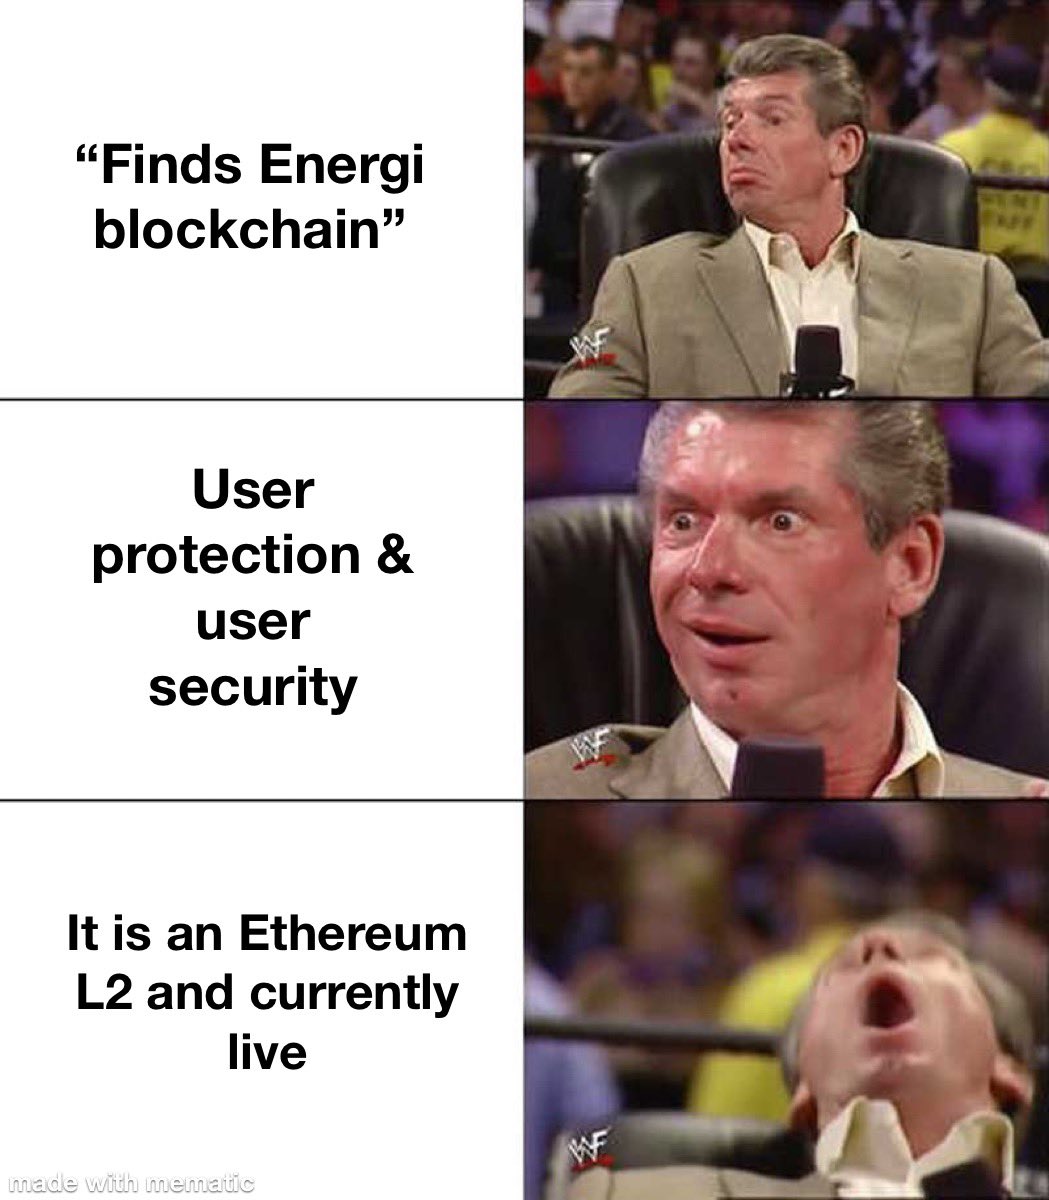 It can’t get any better than user protection & user security. What more could you want on an Ethereum based L2 chain 😆

#Crypto